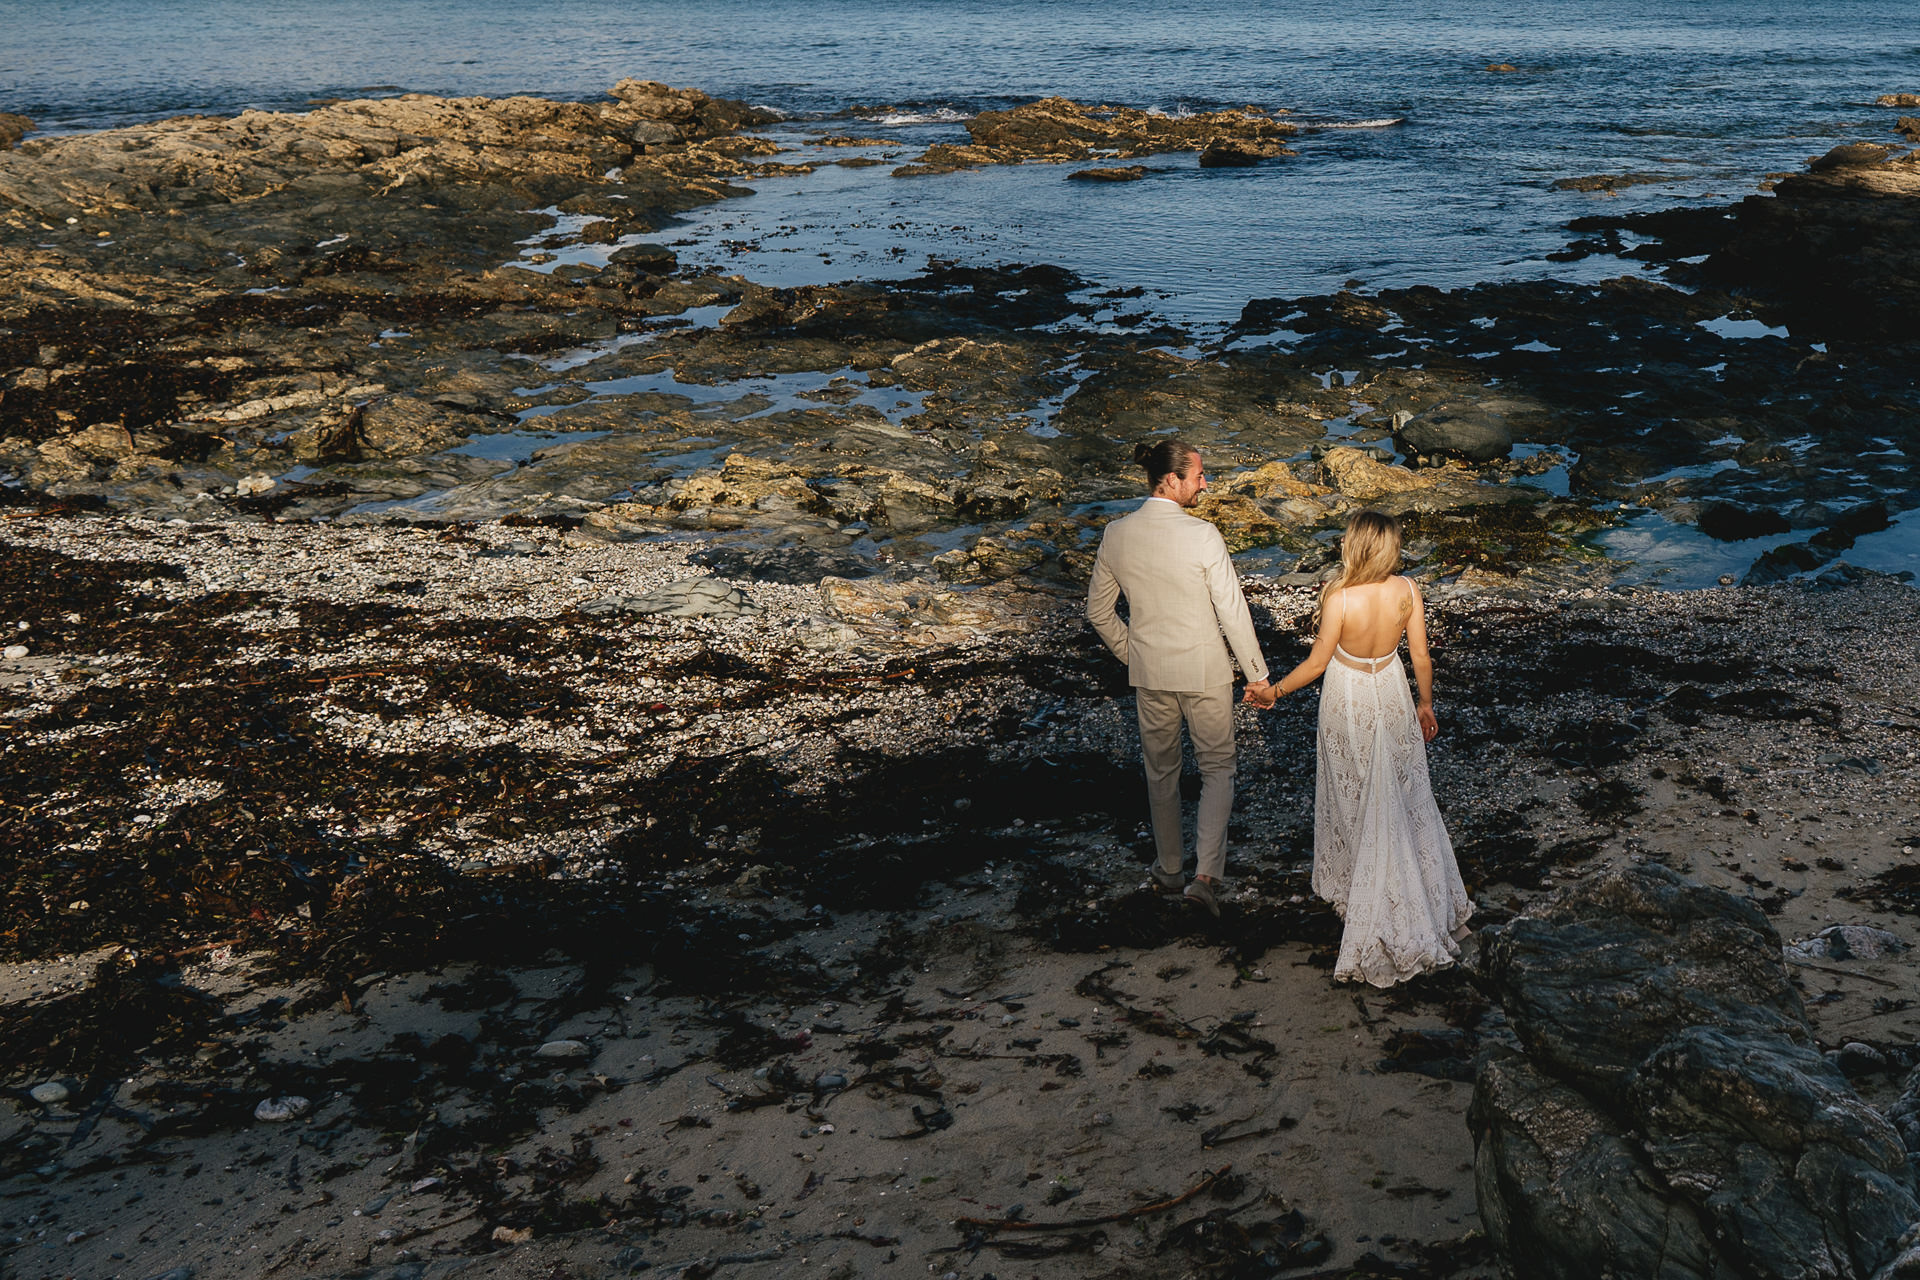 A bride and groom walking across the beach together during their Prussia Cove wedding in Cornwall